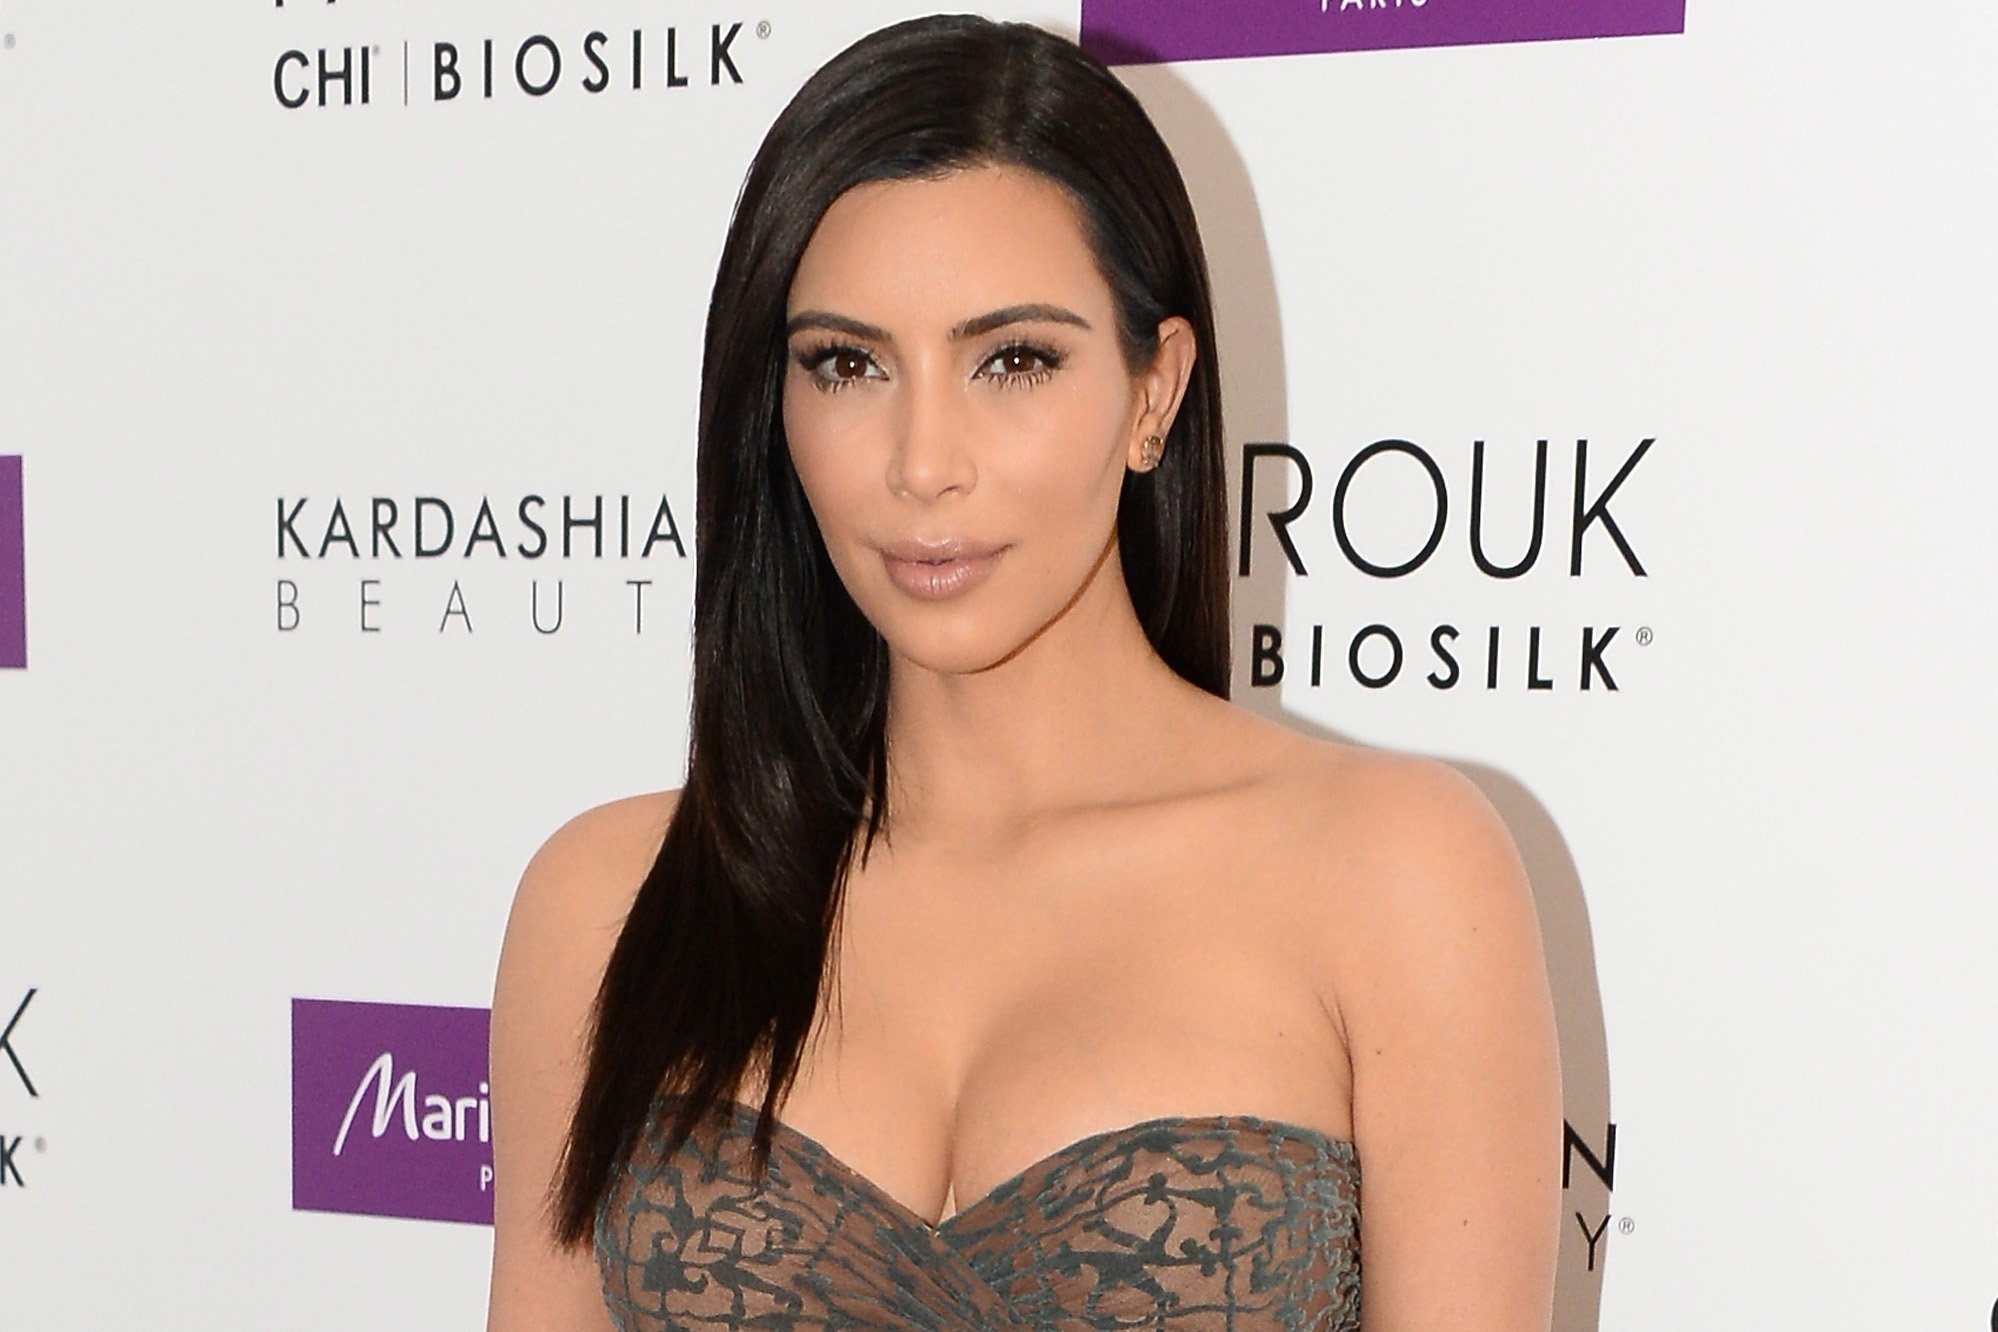 11-million-worth-of-jewellery-stolen-from-kim-kardashian-at-gunpoint-in-paris-theinfong-com